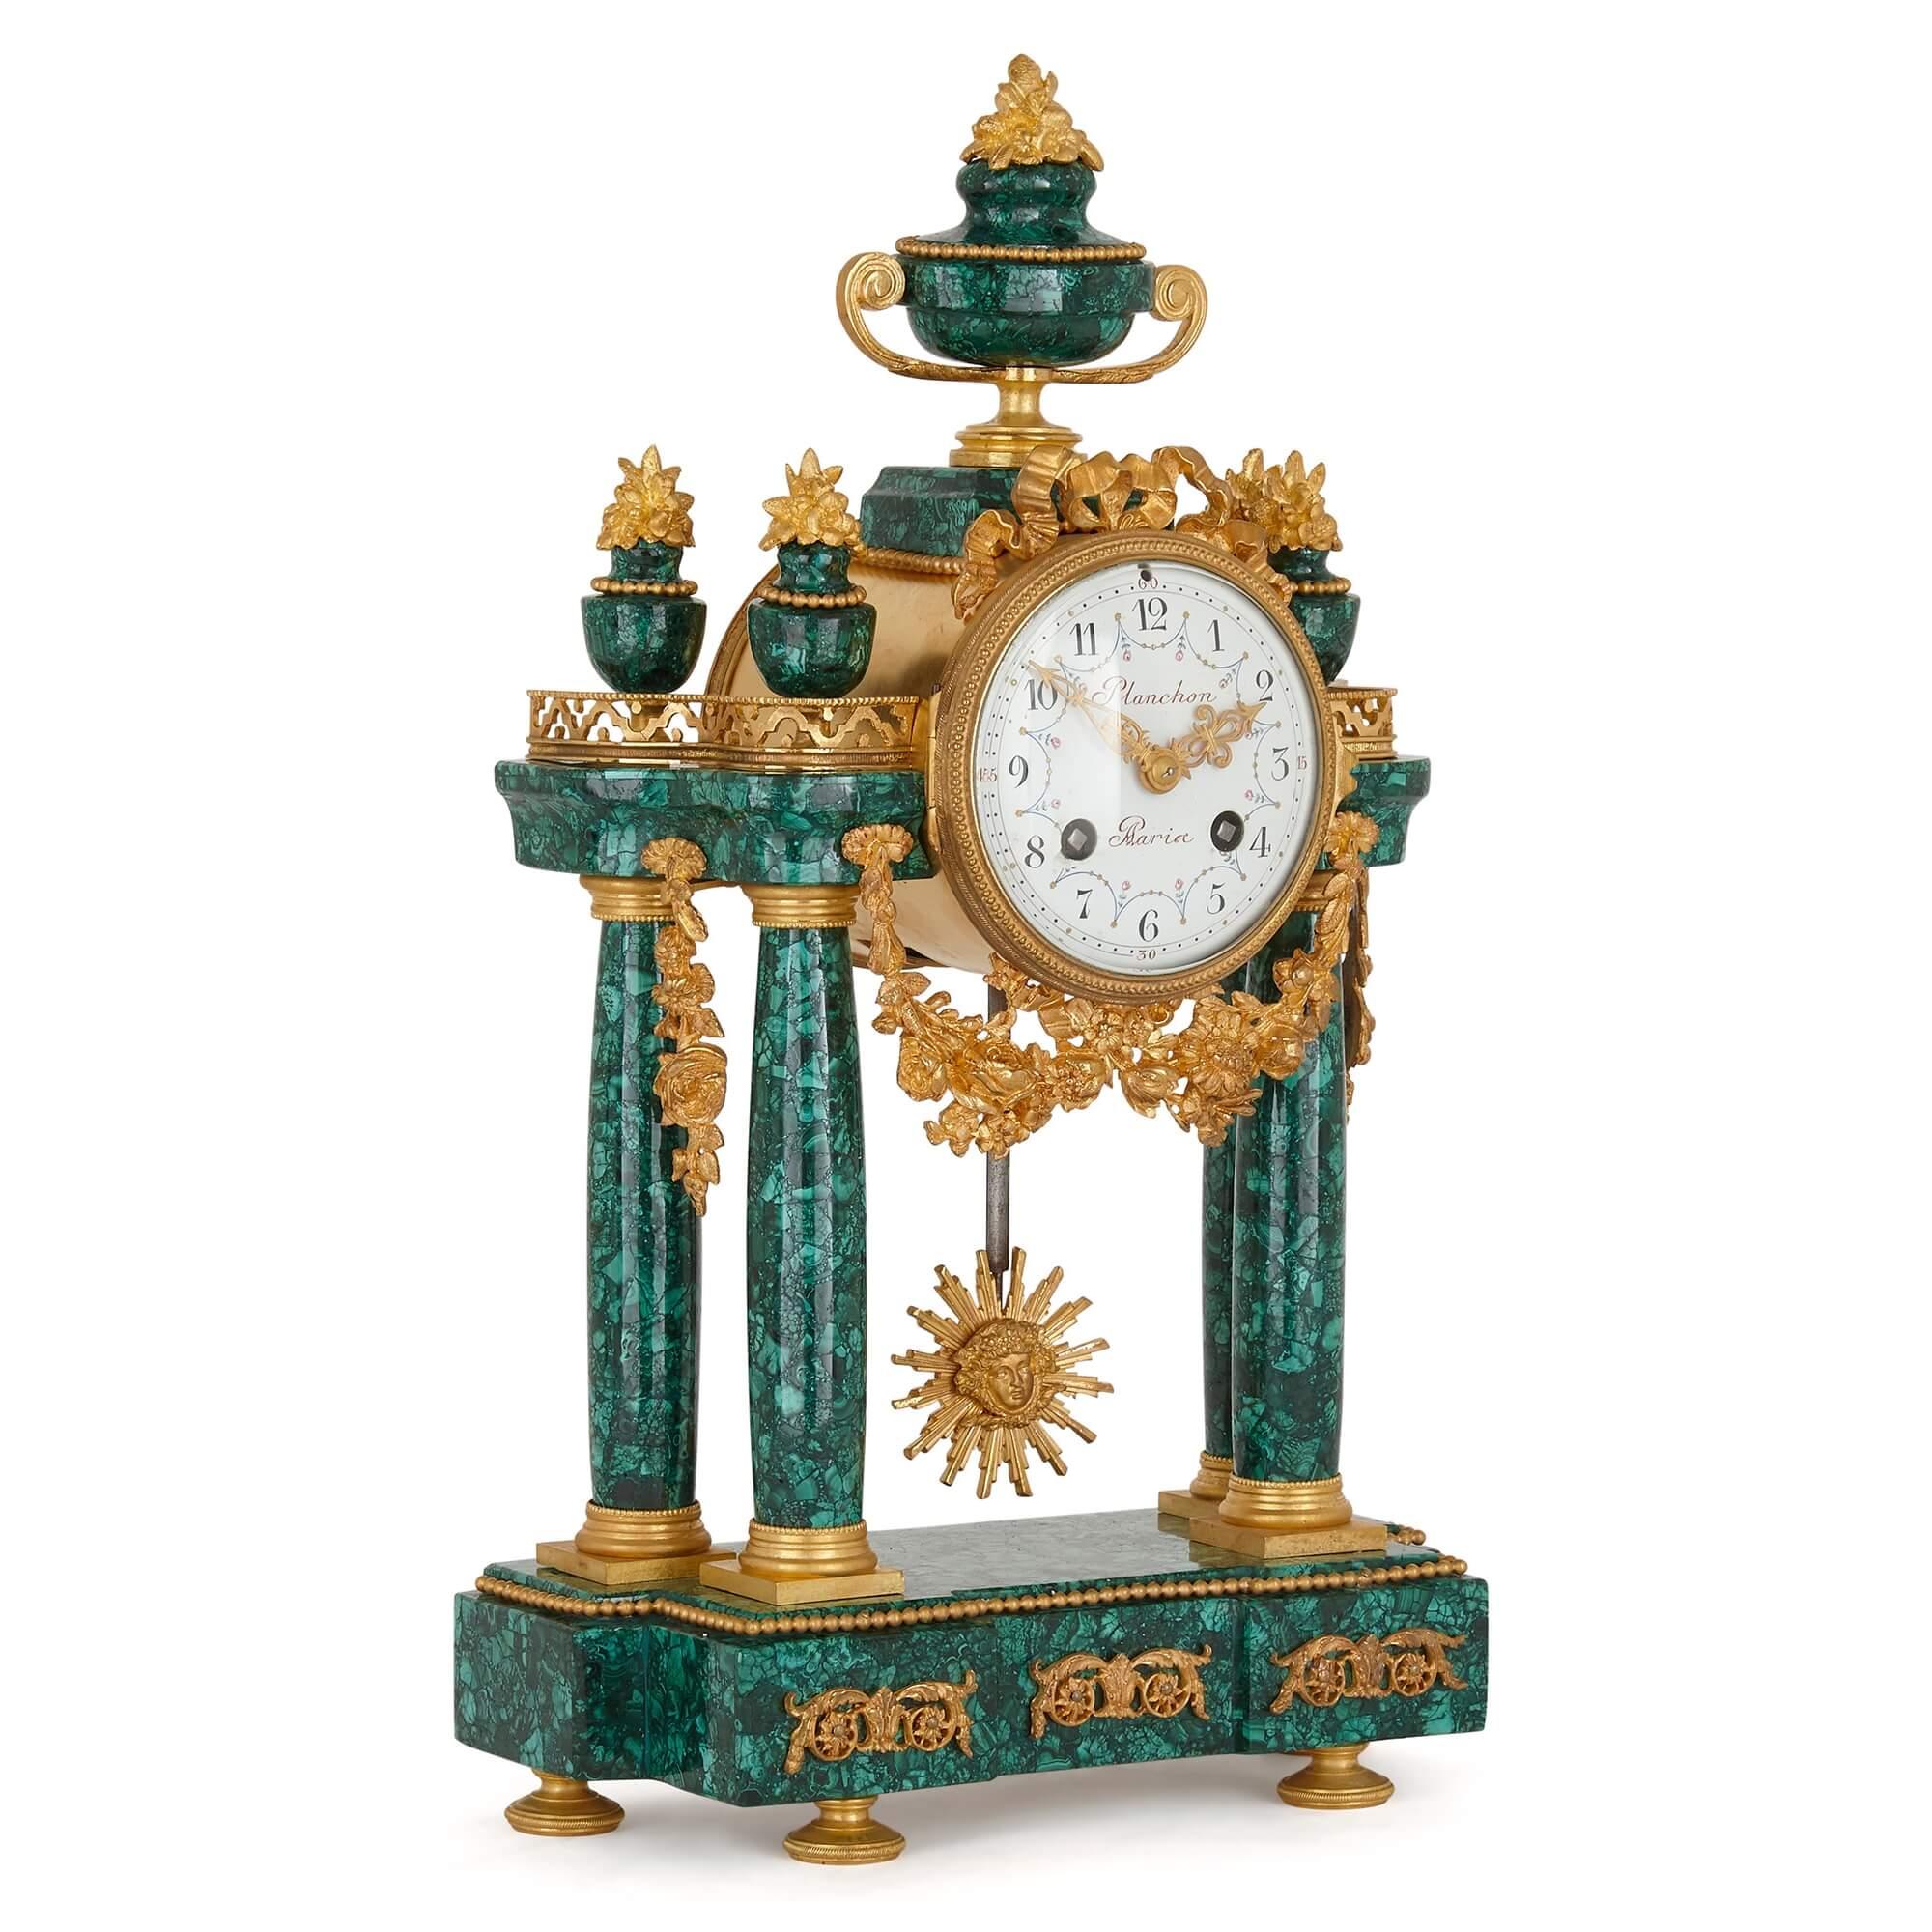 Neoclassical style gilt bronze and malachite mantel clock.
French, late 19th century
Measures: height 39cm, width 23cm, depth 11cm

This elegant mantel clock, crafted from malachite and gilt bronze, is a superb demonstration of the Louis XVI